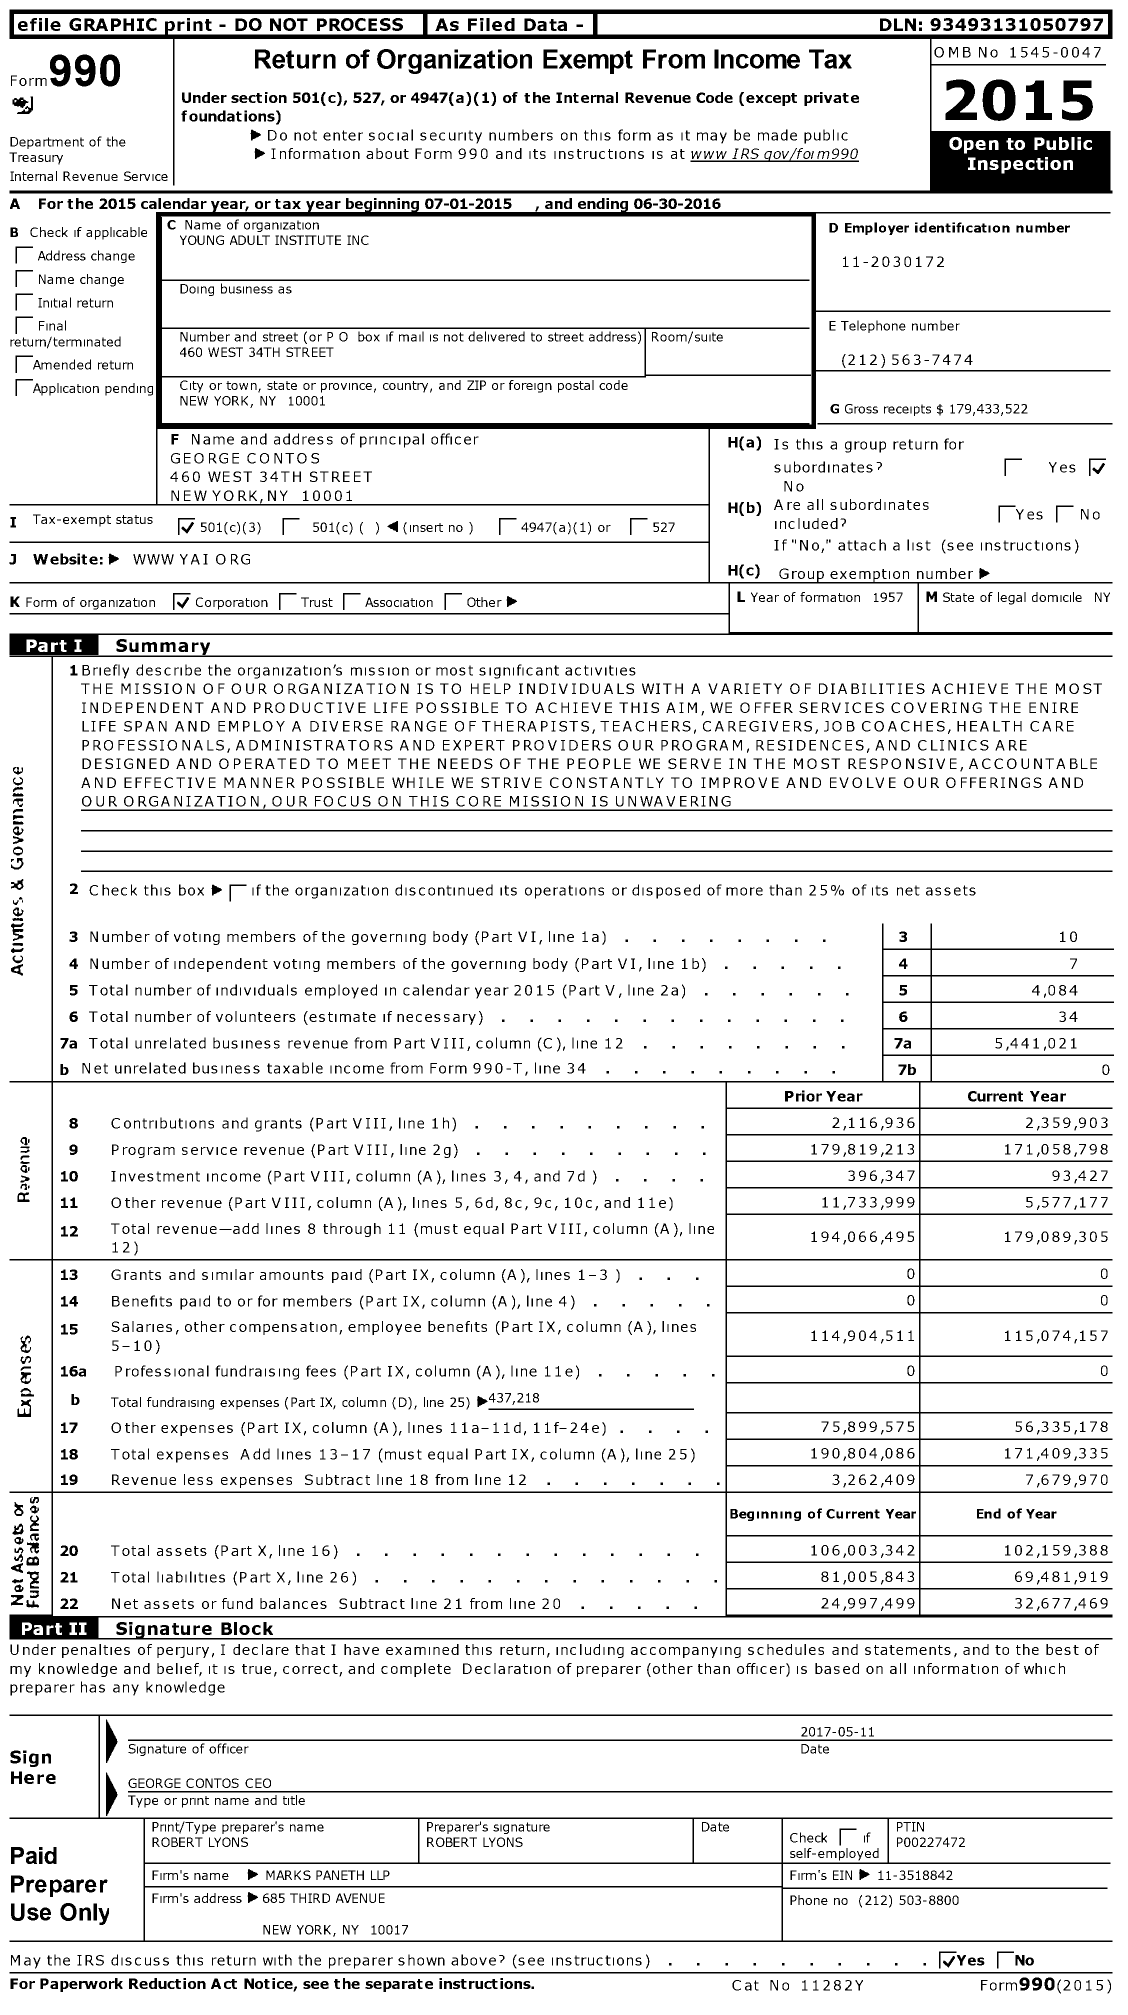 Image of first page of 2015 Form 990 for Young Adult Institute (YAI)